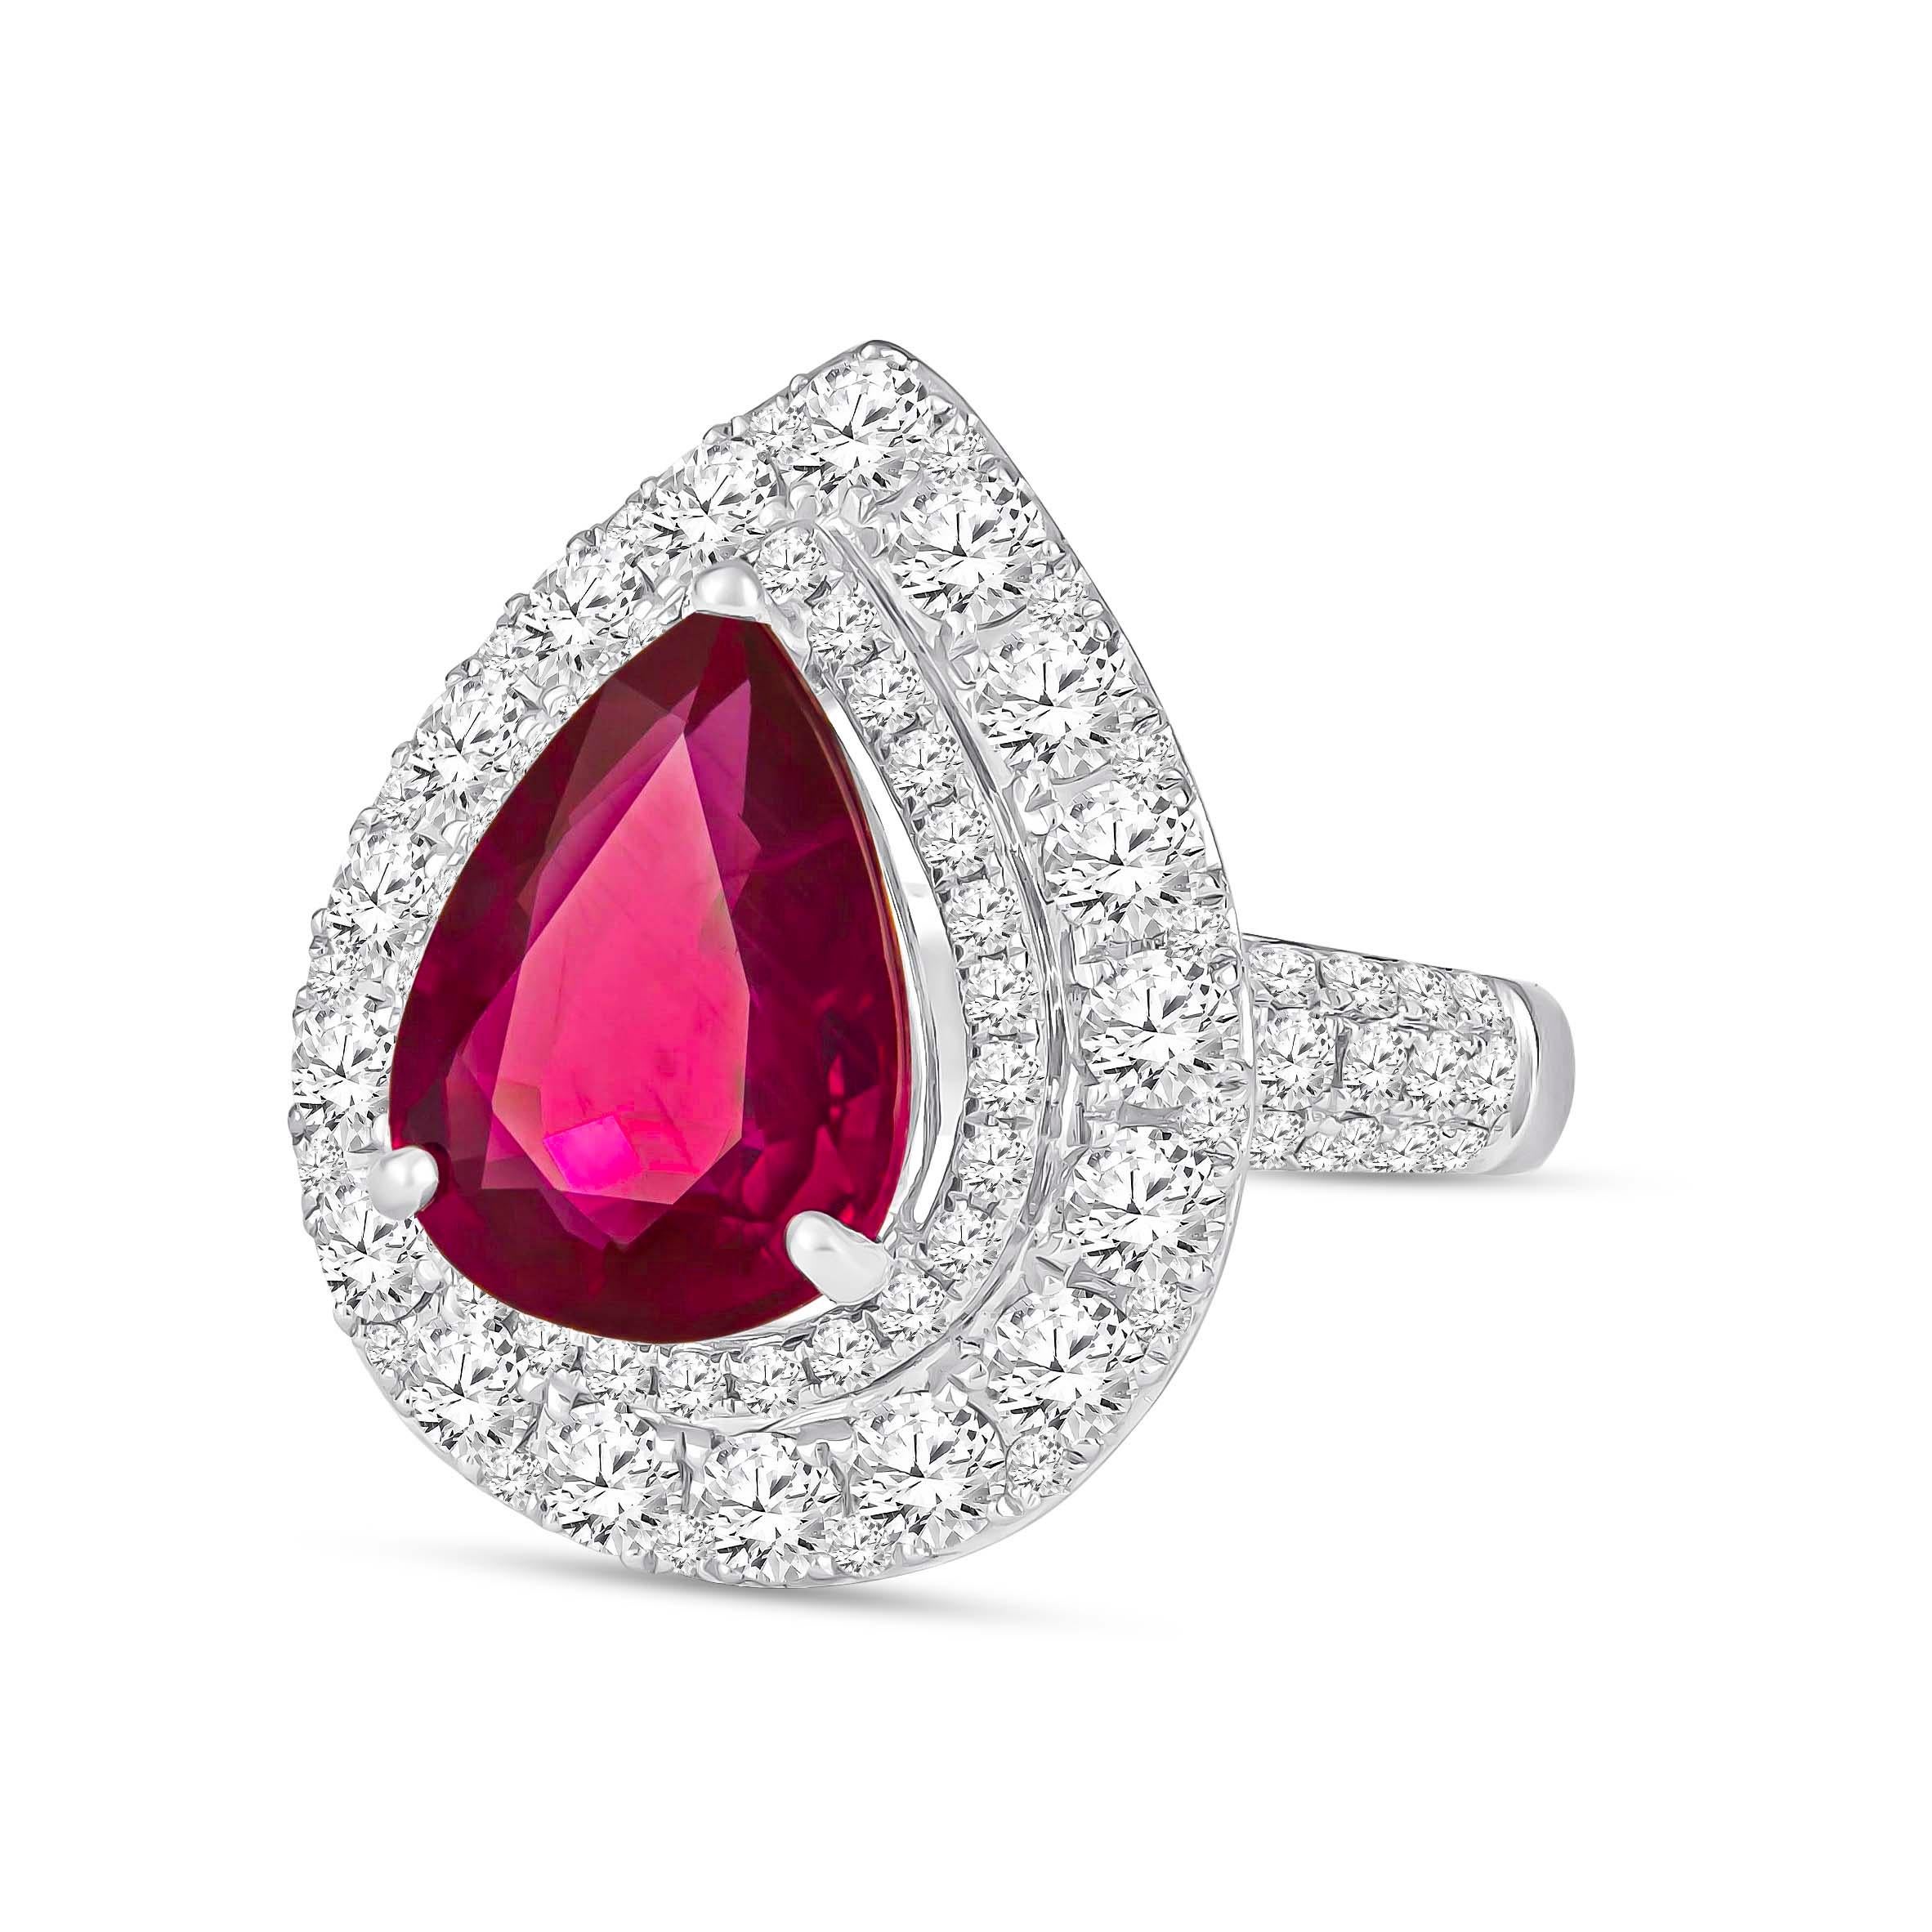 Absolutely gorgeous 18K white gold ring showcasing one, GIA certified, 2.53 carat pear shaped Mozambique natural ruby. The center stone is beautifully surrounded by 1.41 carats of round brilliant cut diamonds perfectly set in double halo form and